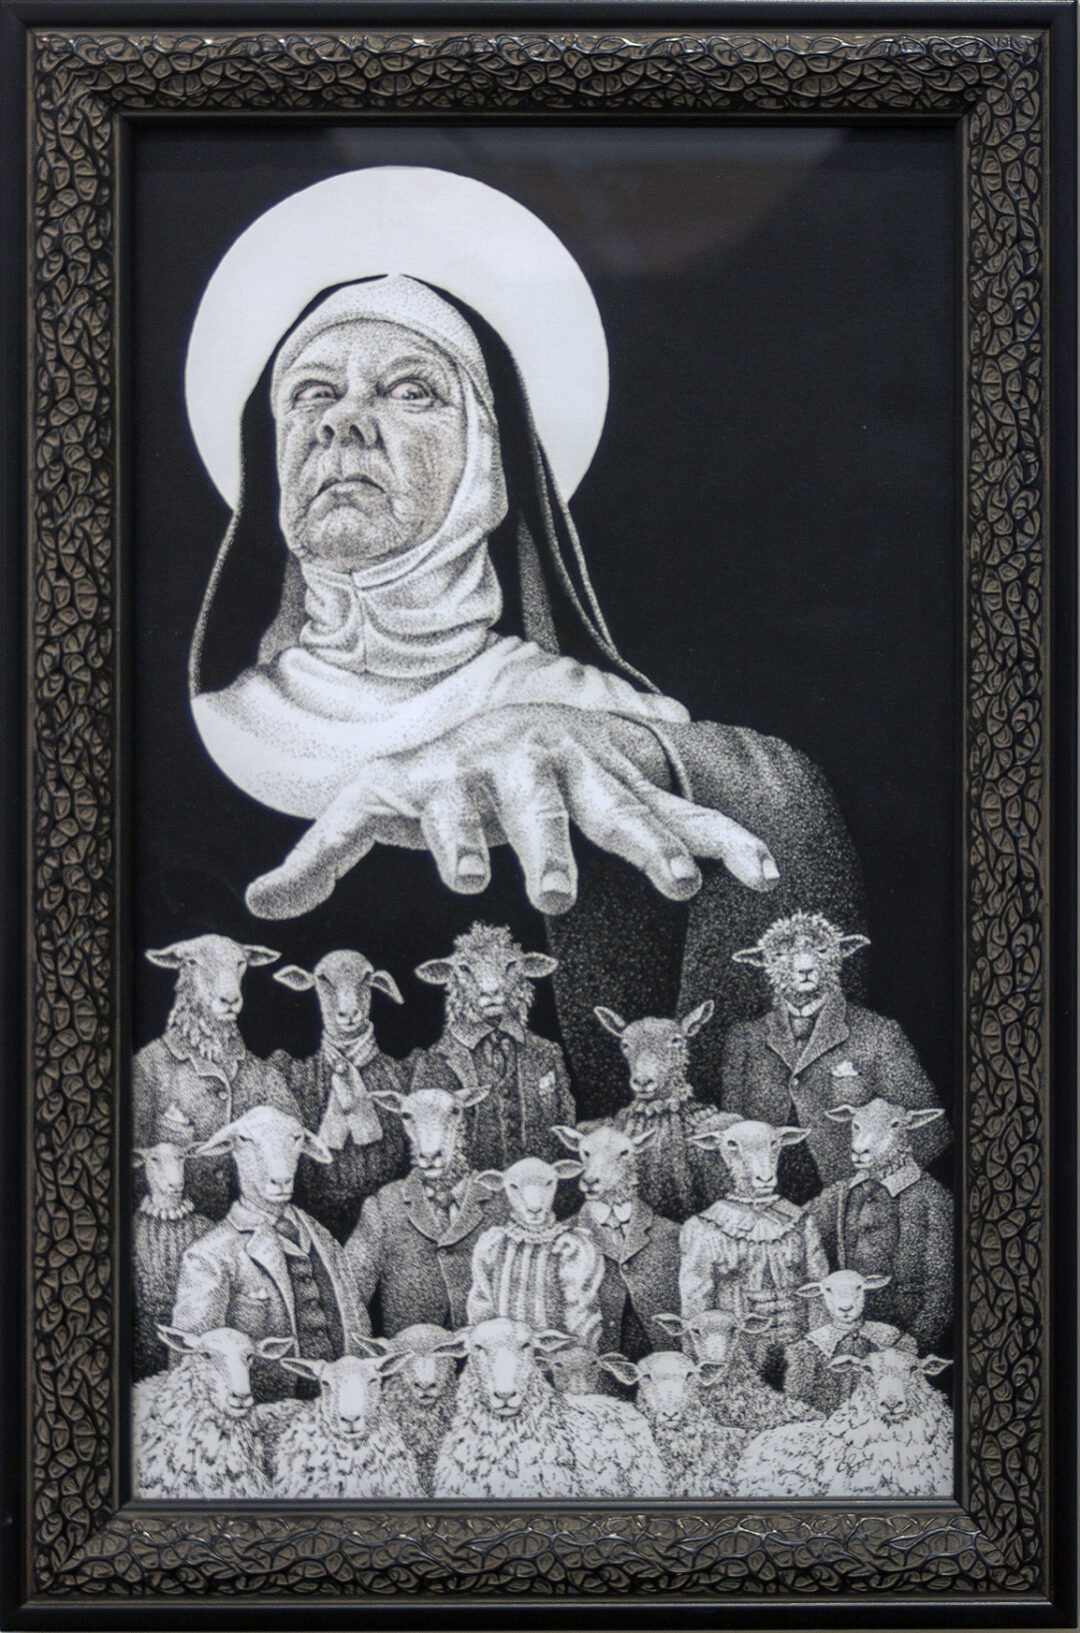 Bill Ross “Give Me That Old Time Religion” ink on Bristol paper, 19″ x 13″ – $250.00